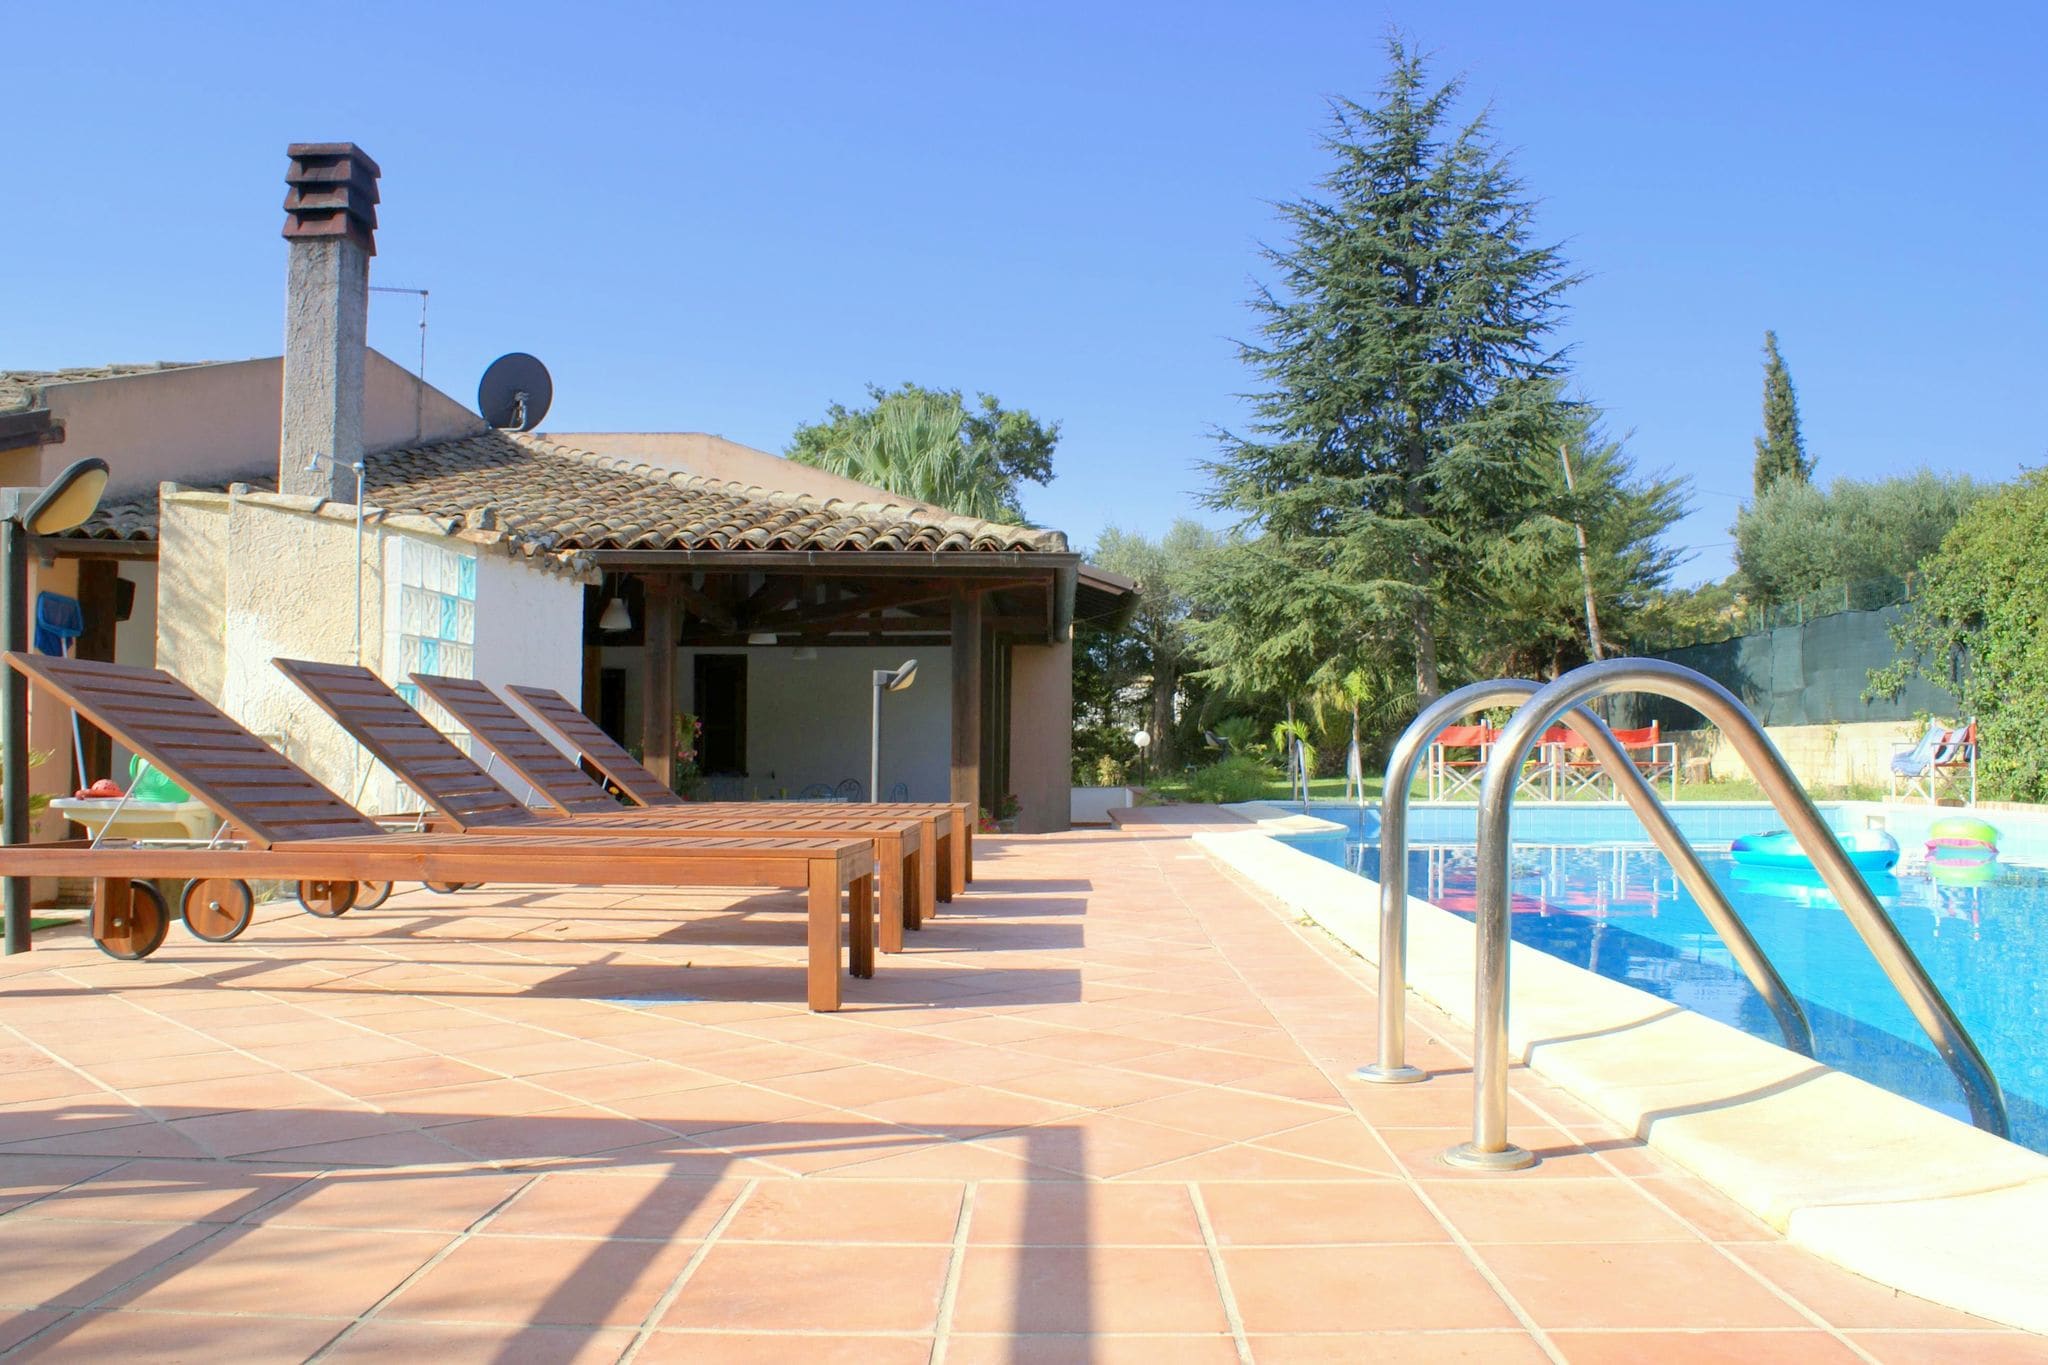 Luxurious Villa in Caltagirone Italy with Private Pool